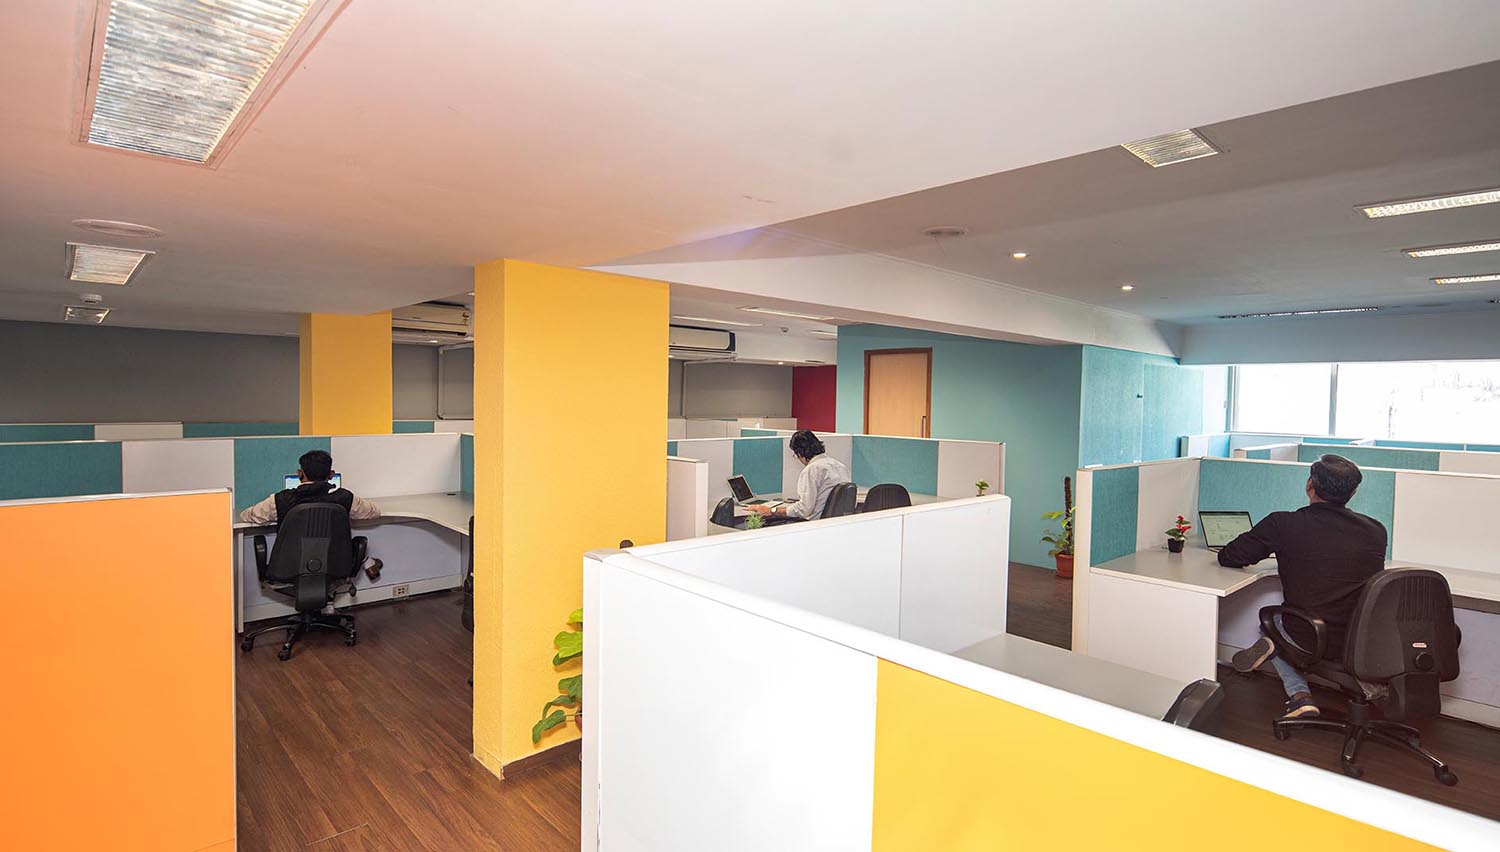 Cove offices’ enterprise solutions in Bangalore